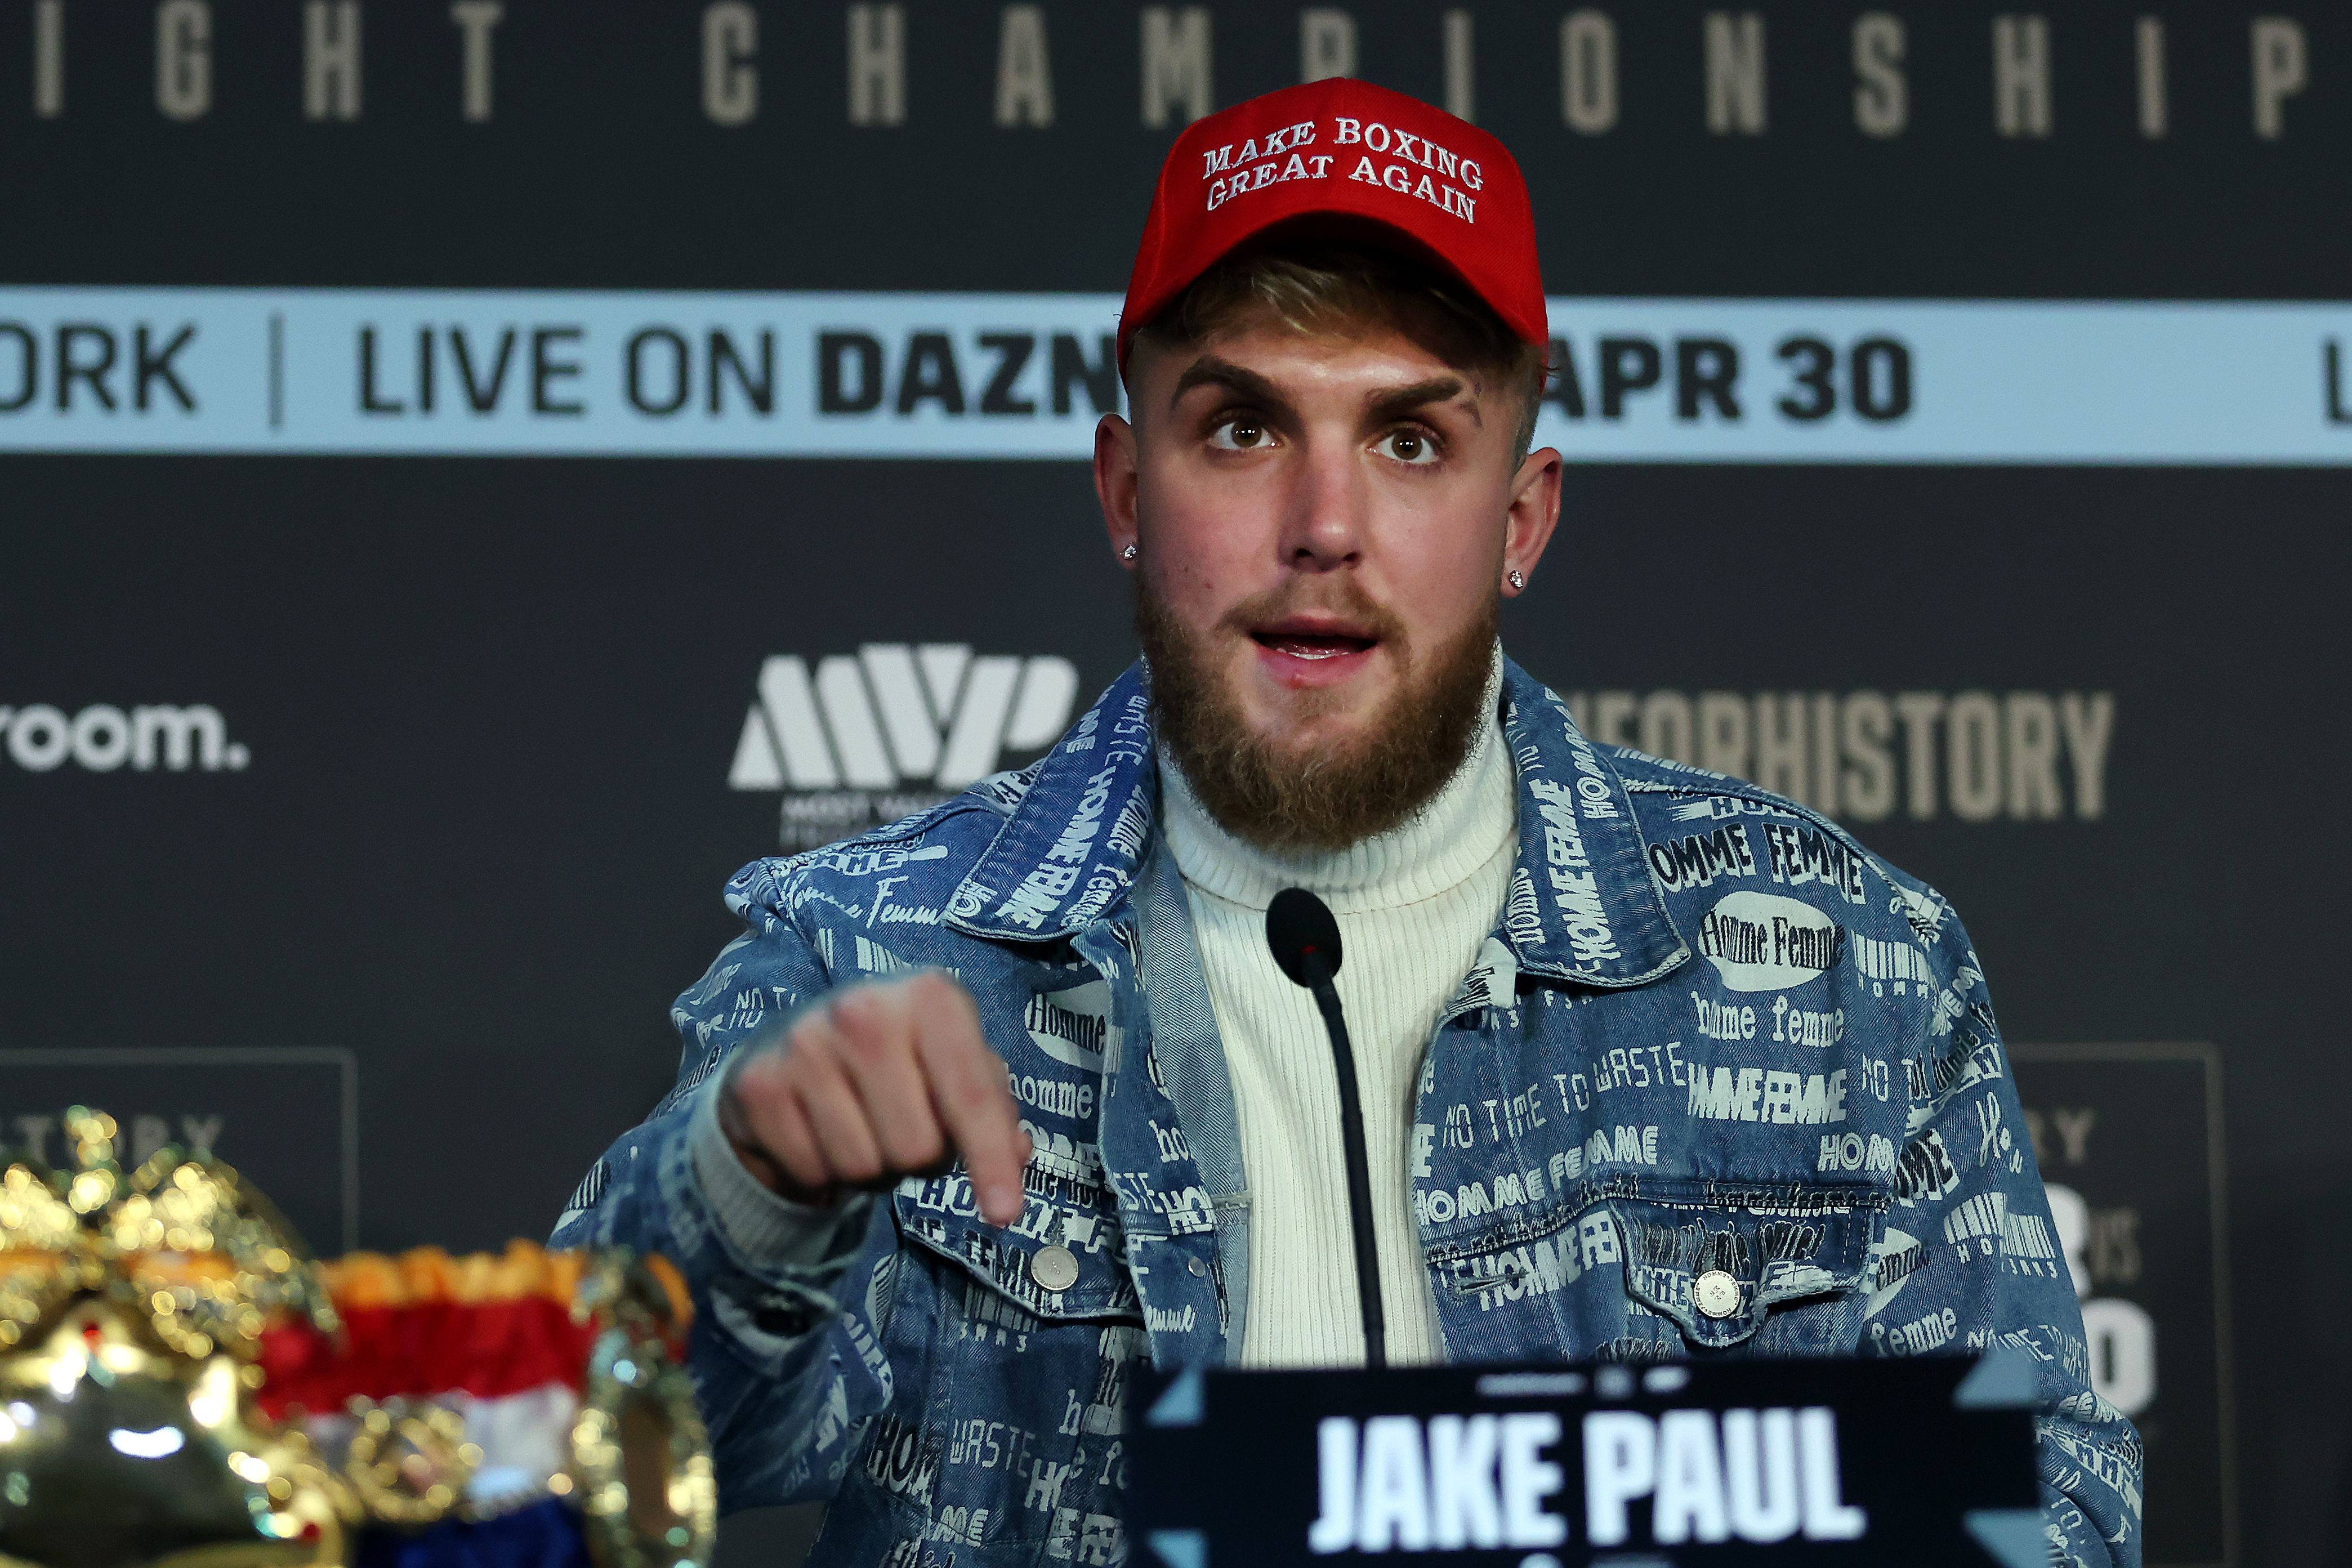 Jake Paul has no qualms calling out other boxers